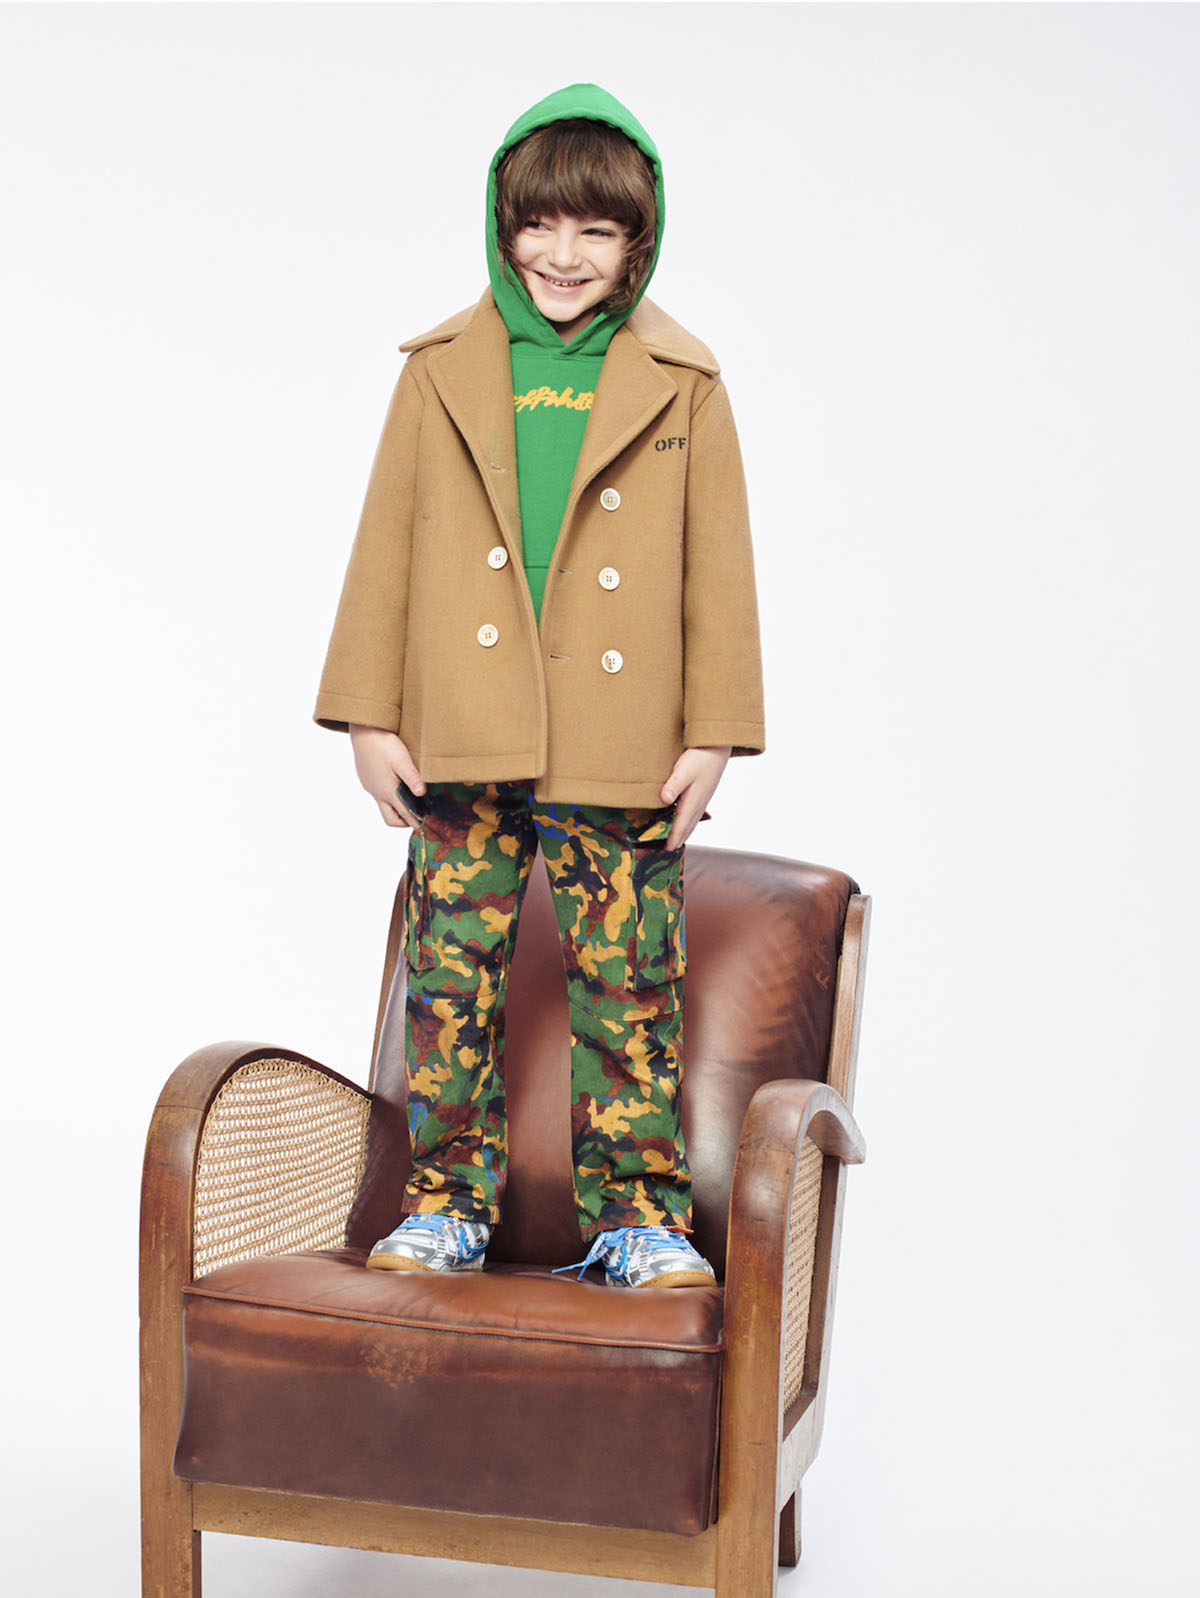 Off-White™ Kids Releases its FW21 Collection